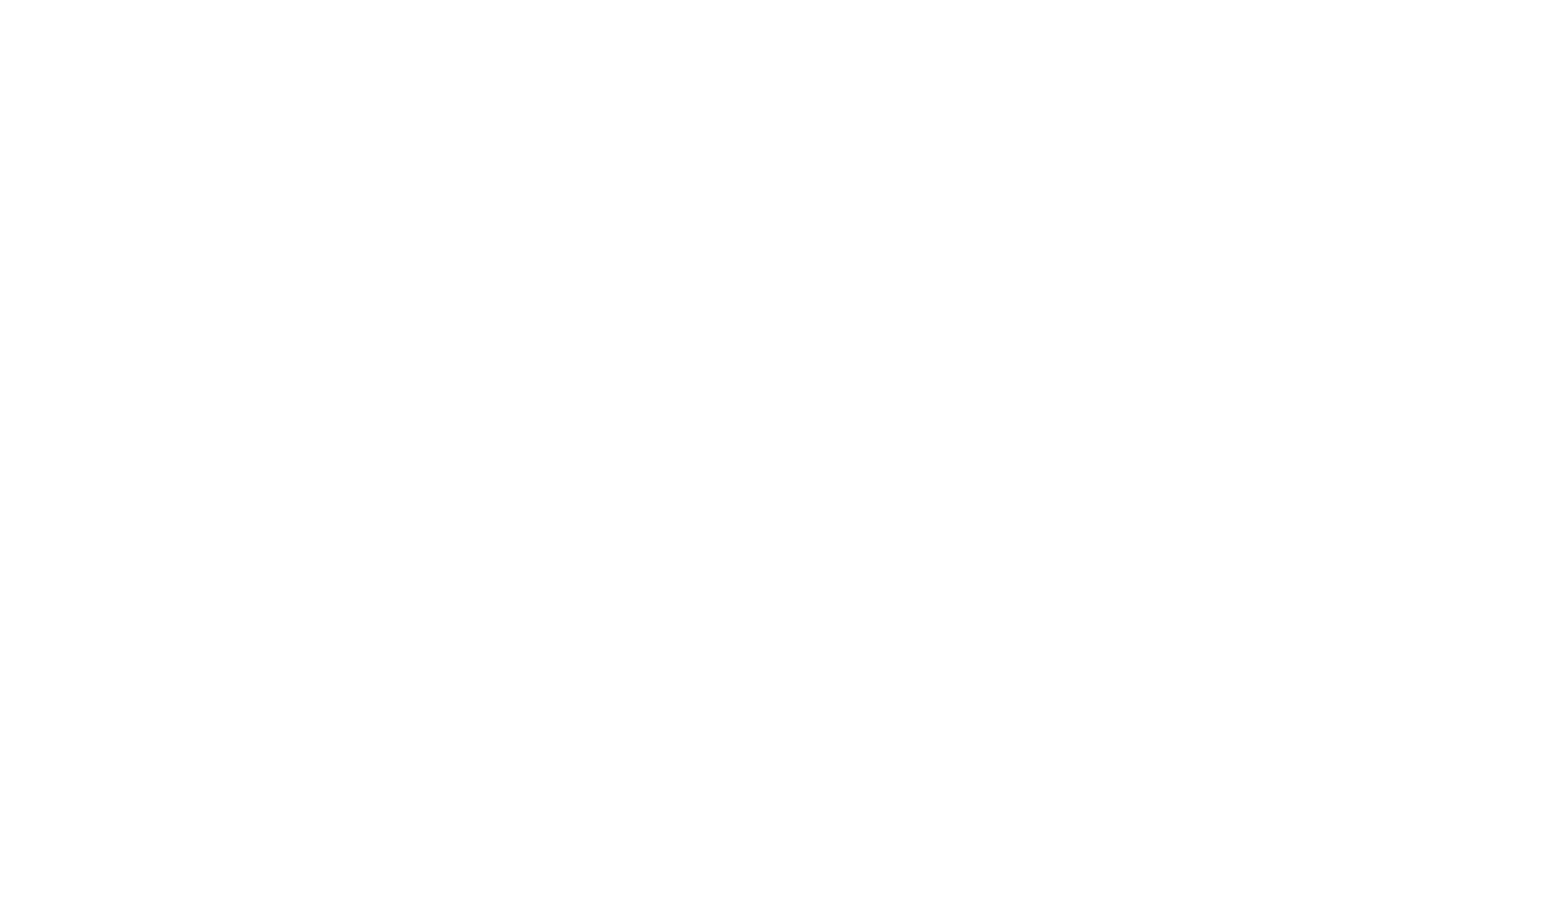 Joie Day Spa